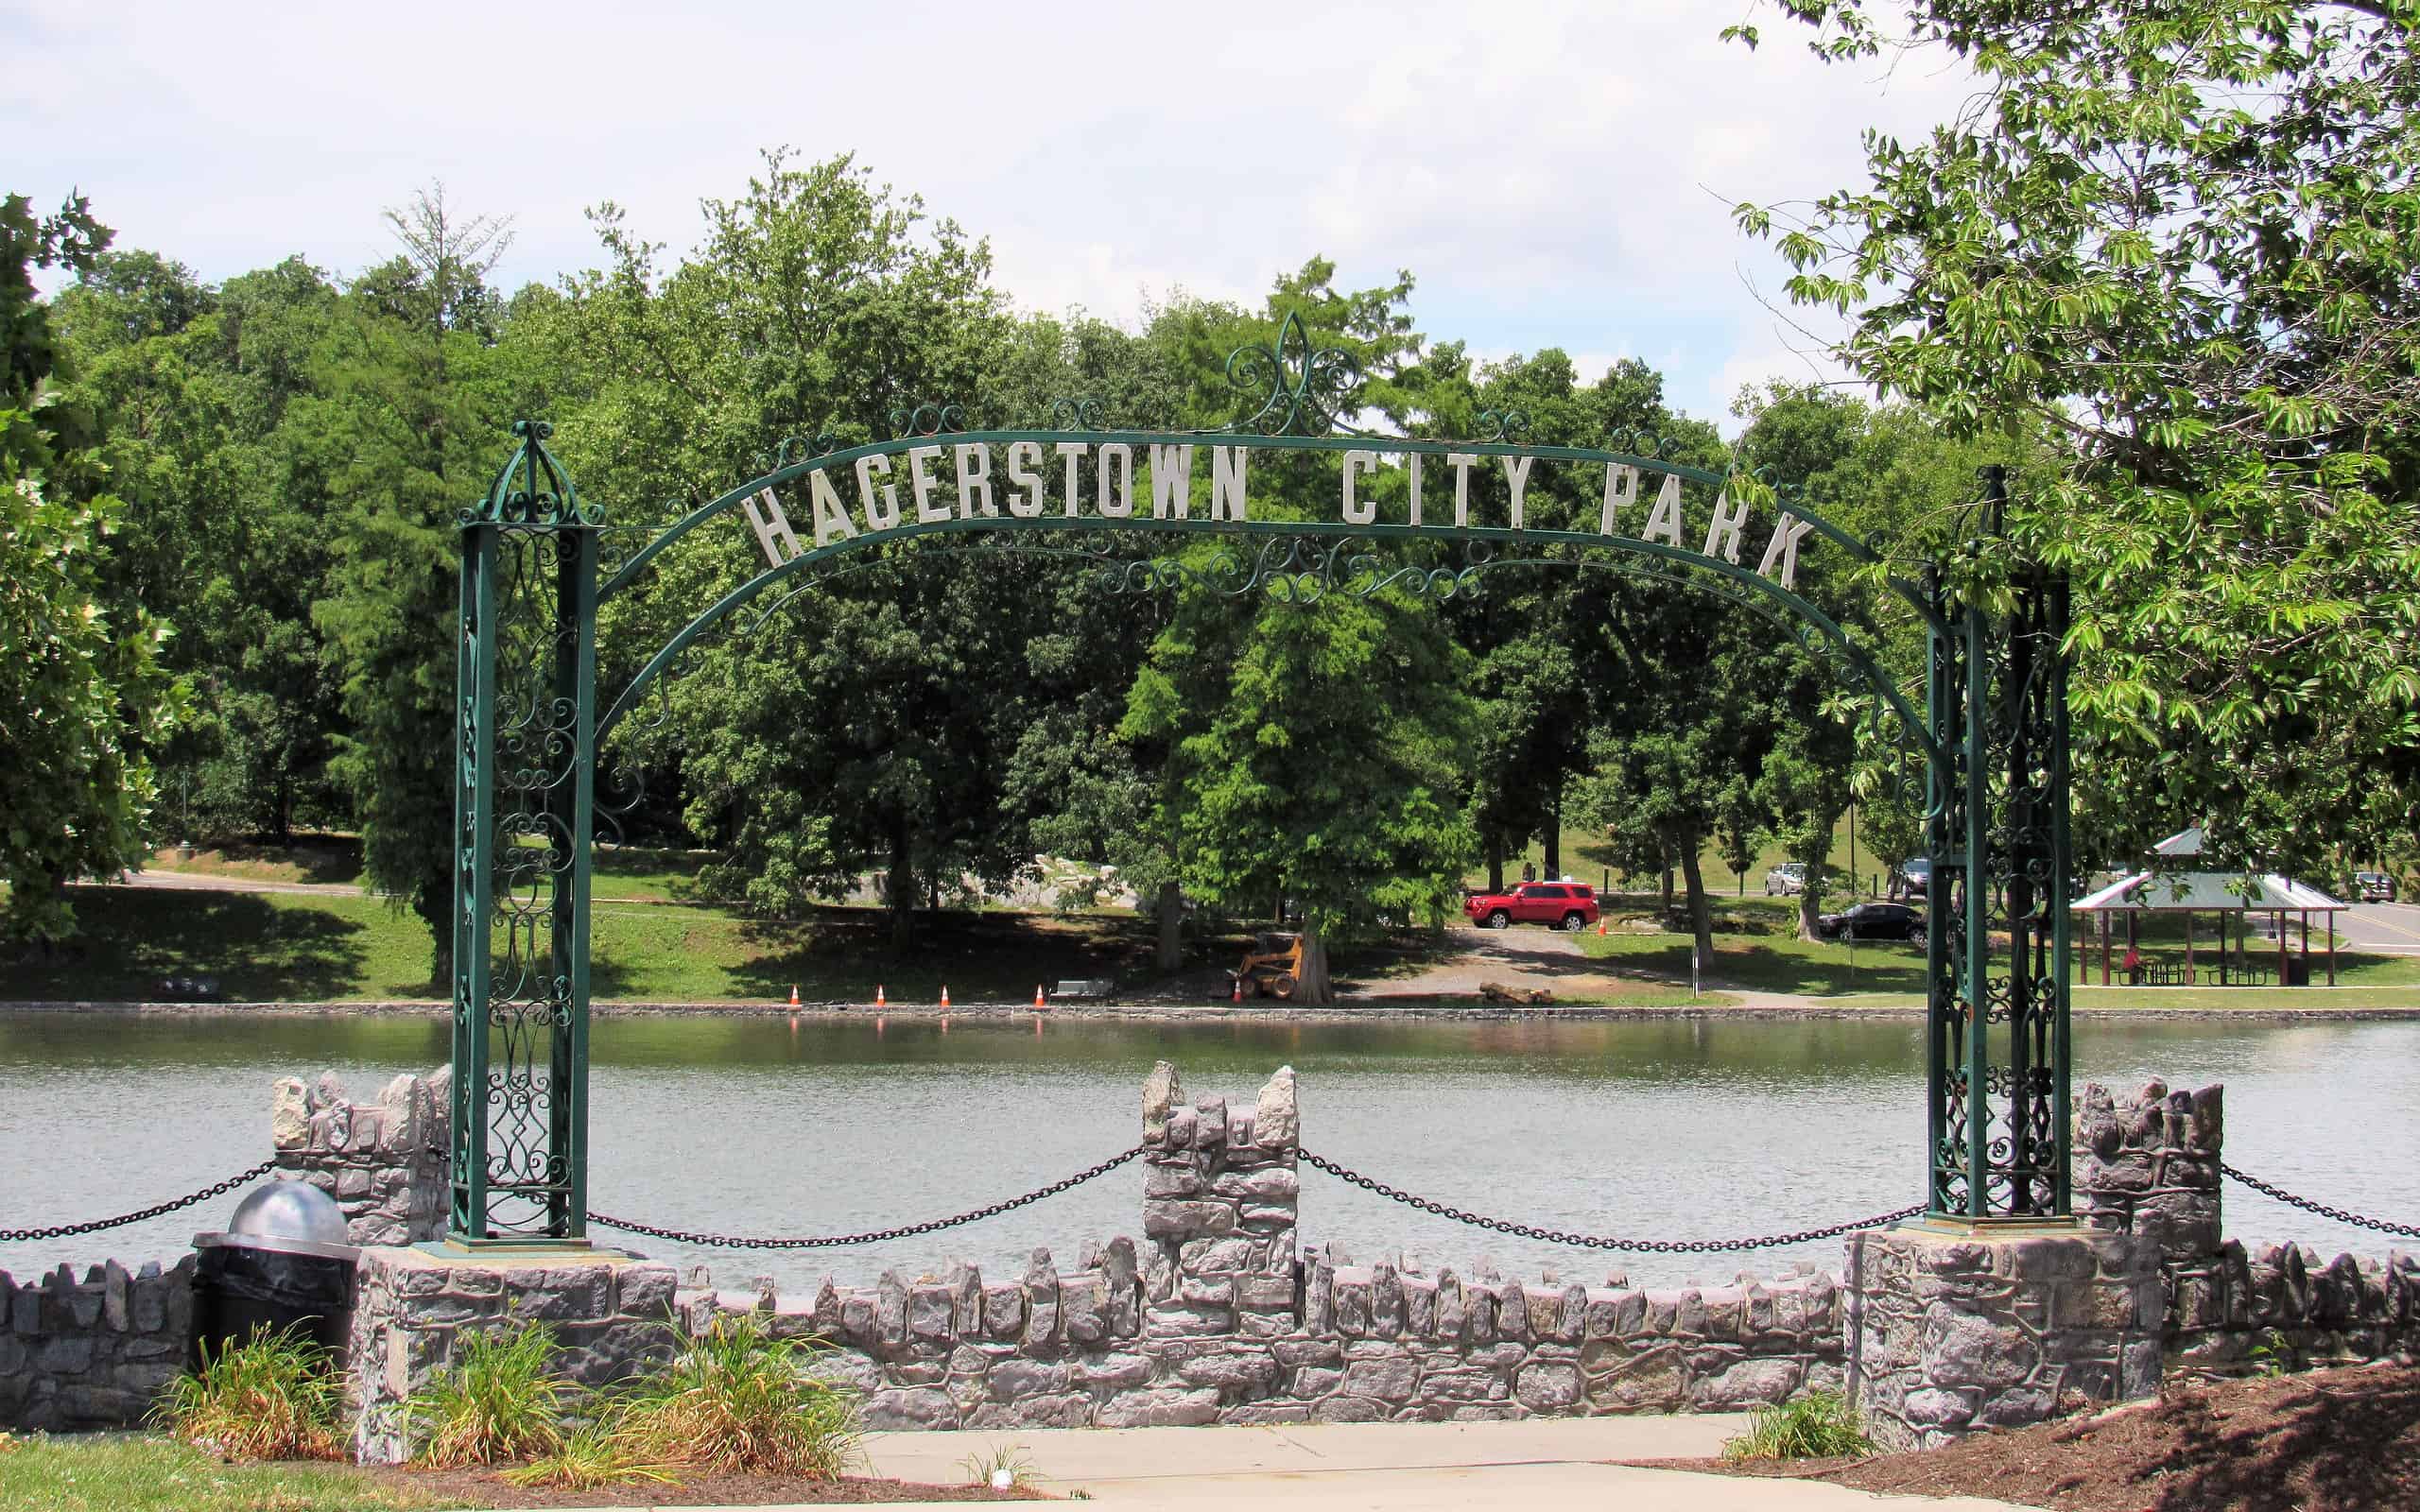 Parco cittadino di Hagerstown